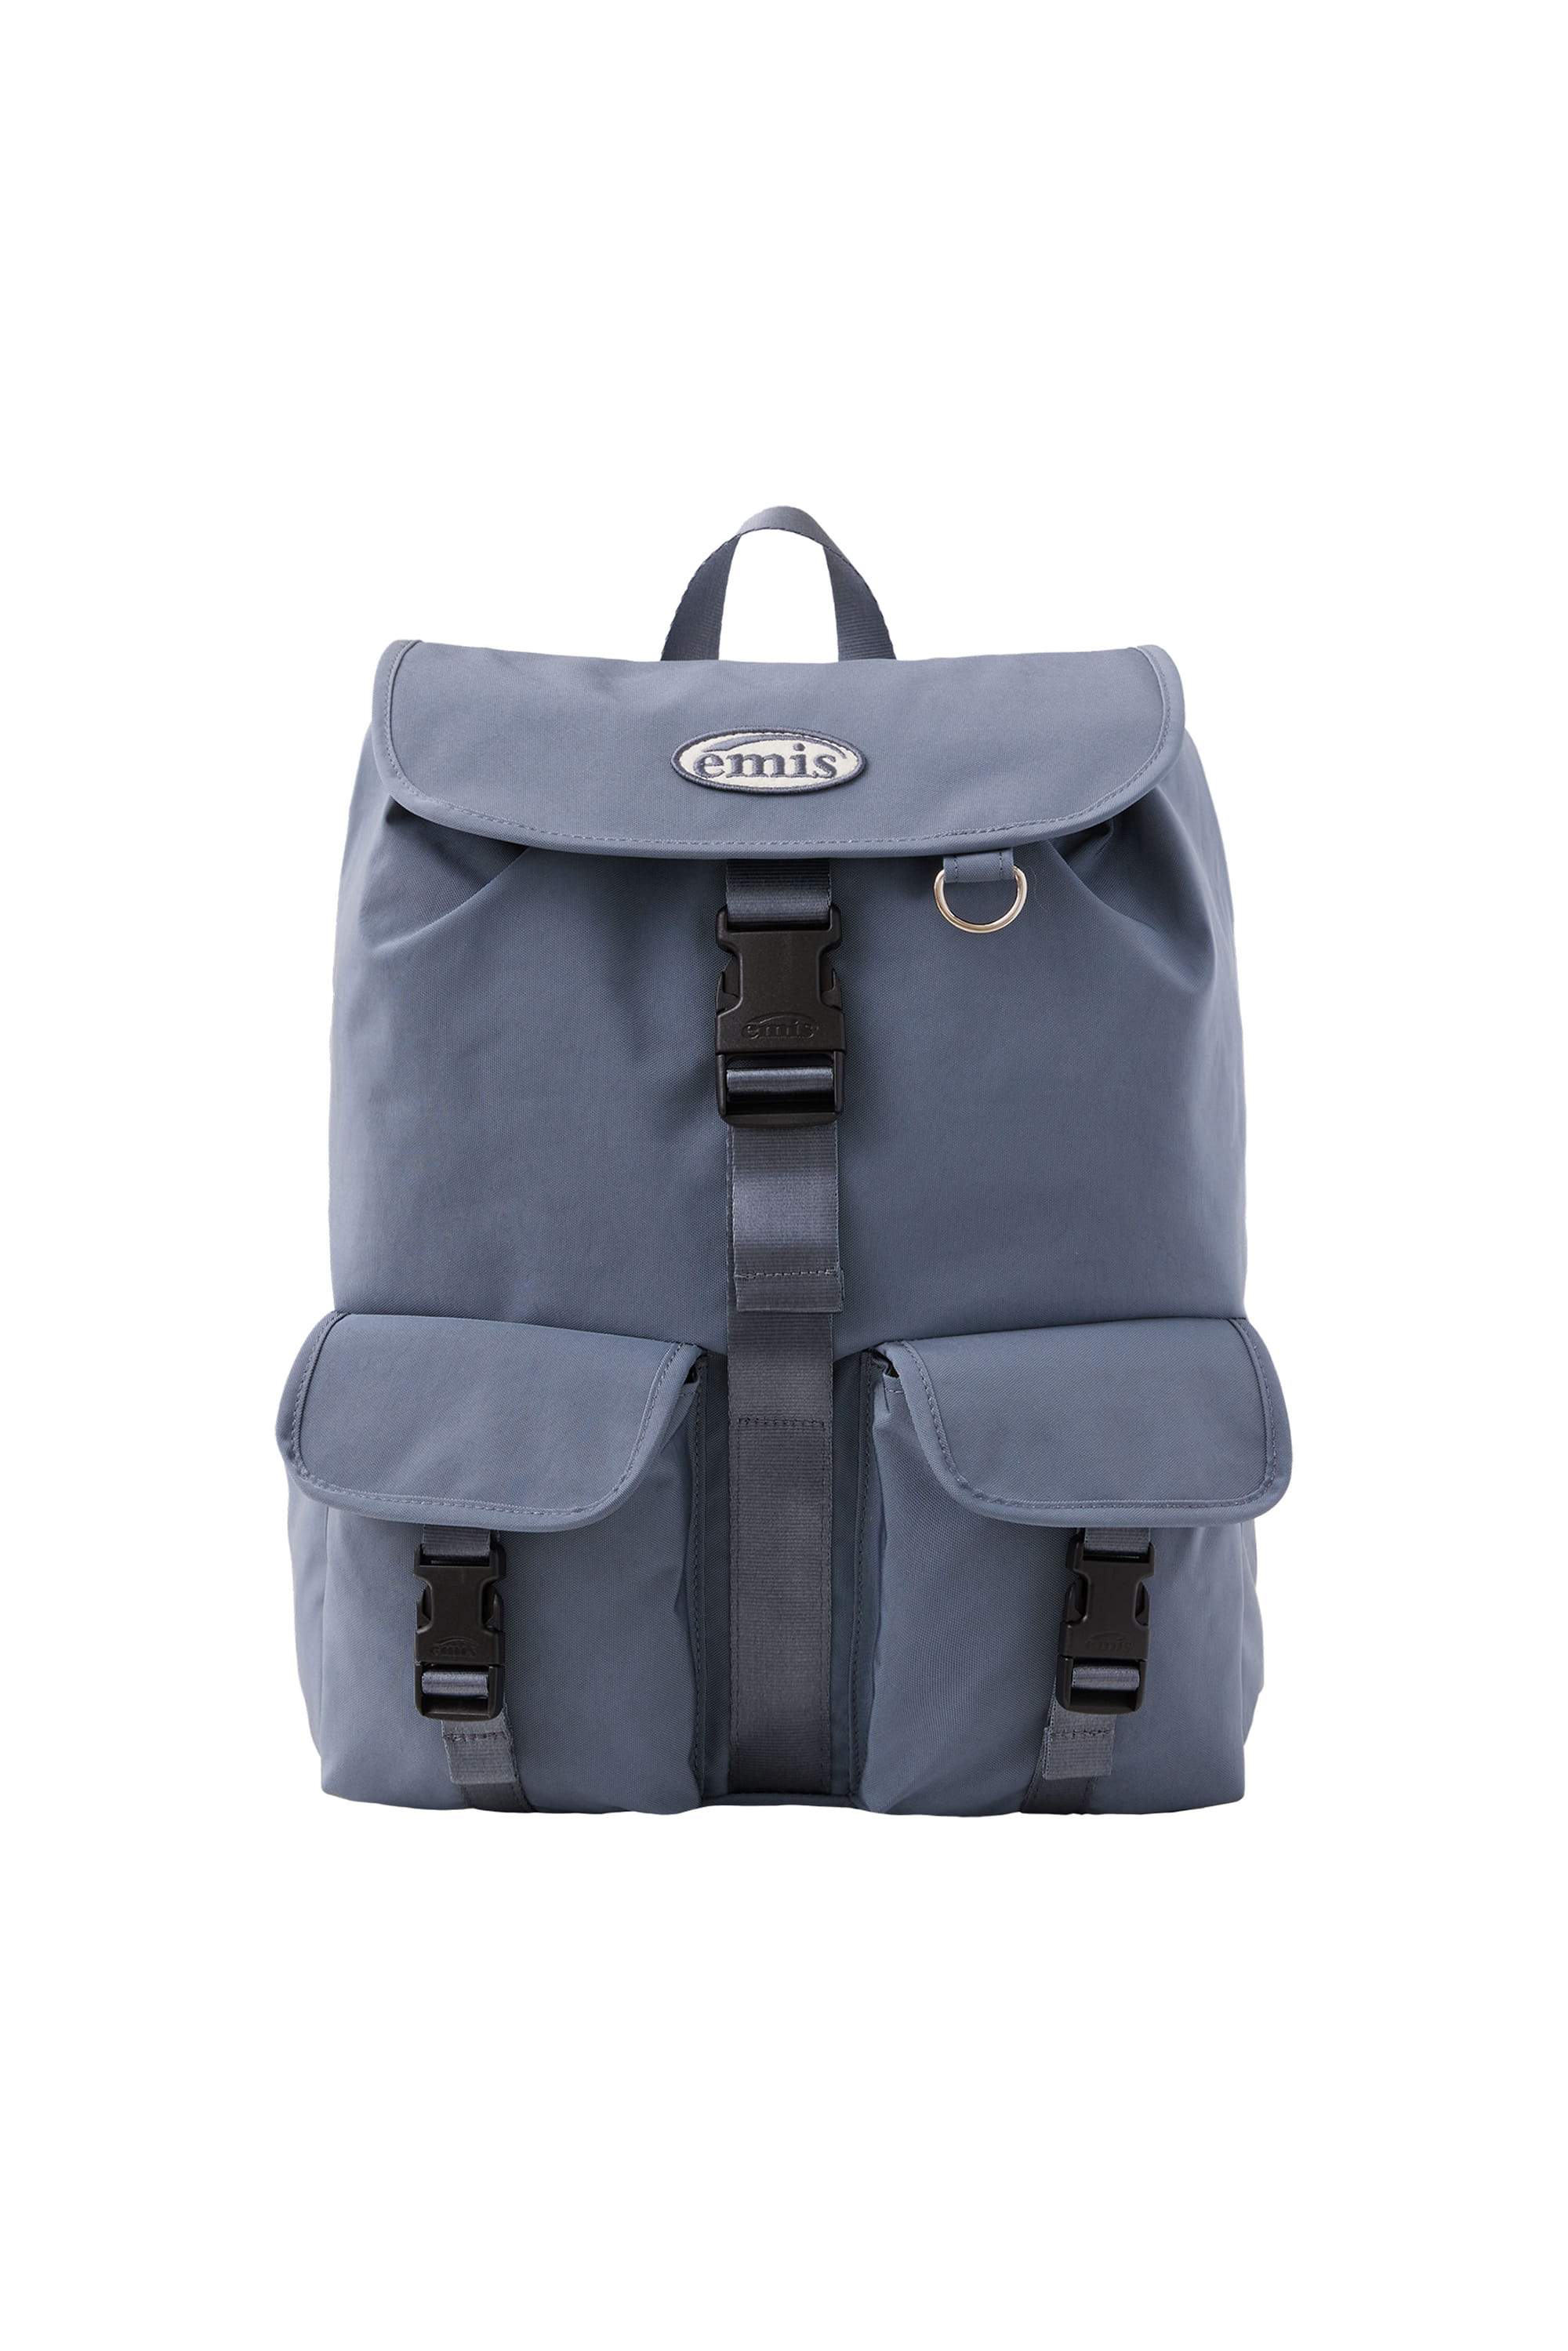 DOUBLE POCKET BACKPACK-GRAY BLUE